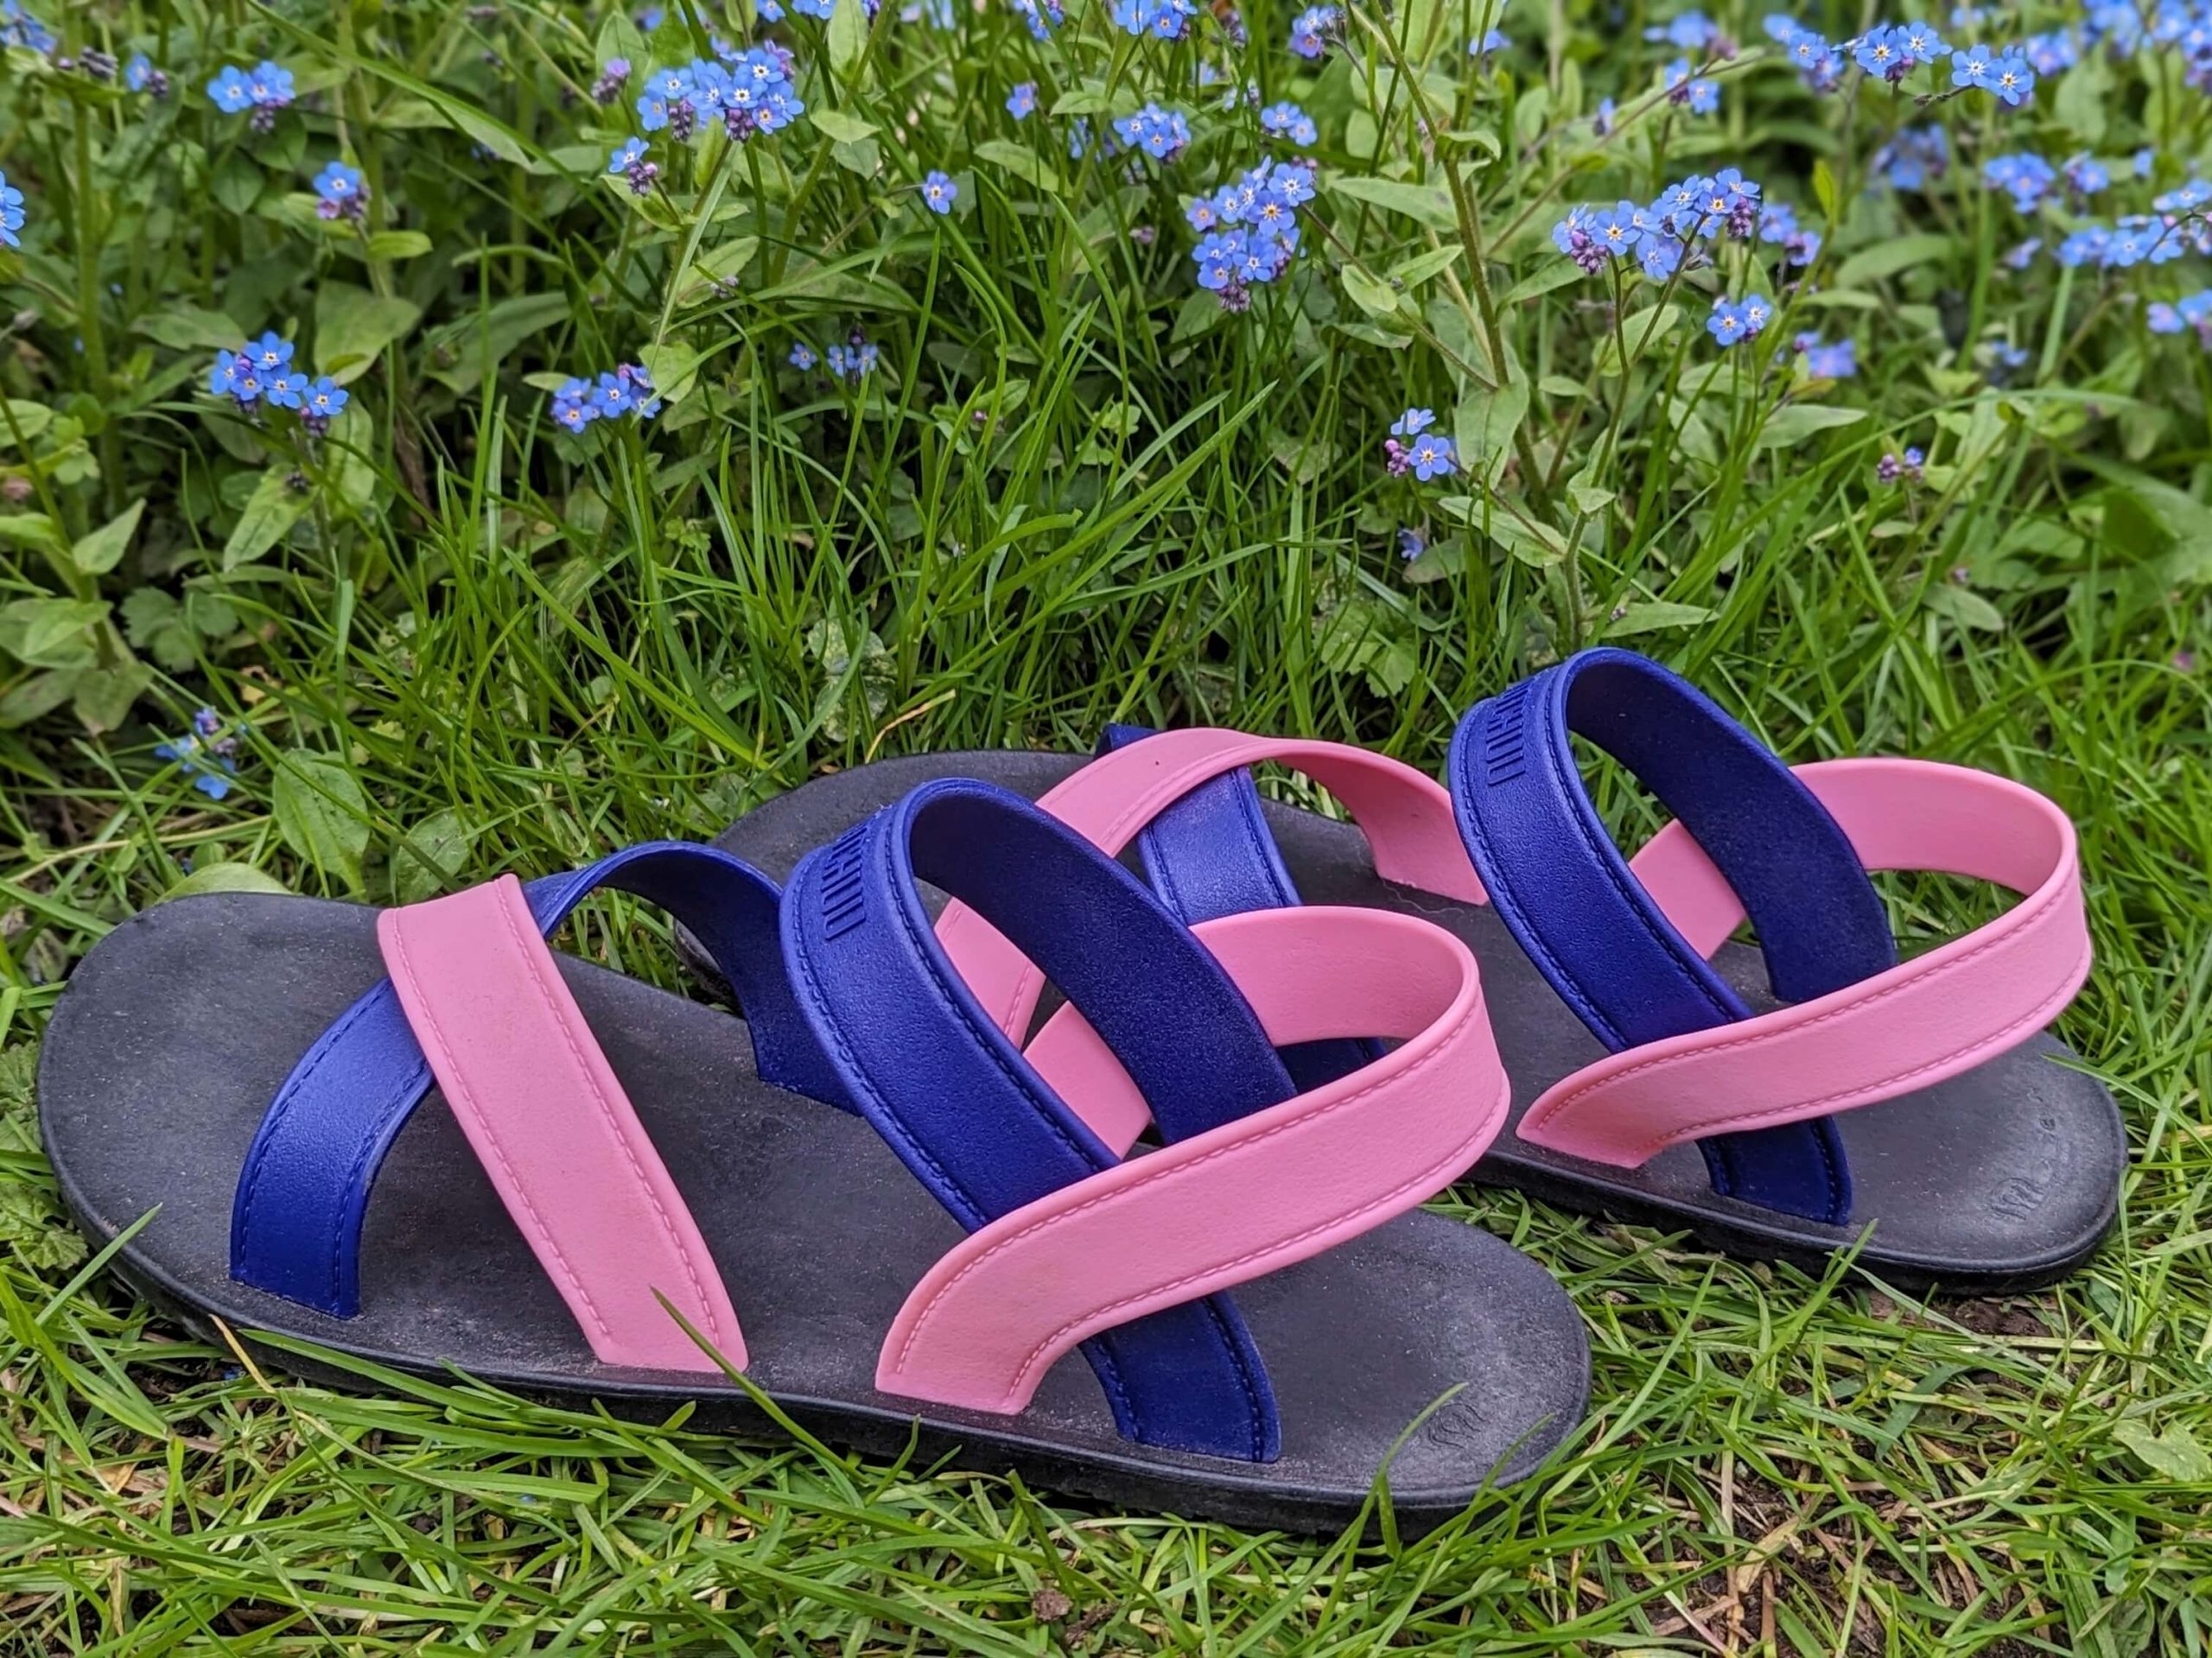 Pink and blue MOO CHUU sandals with black soles displayed on grass